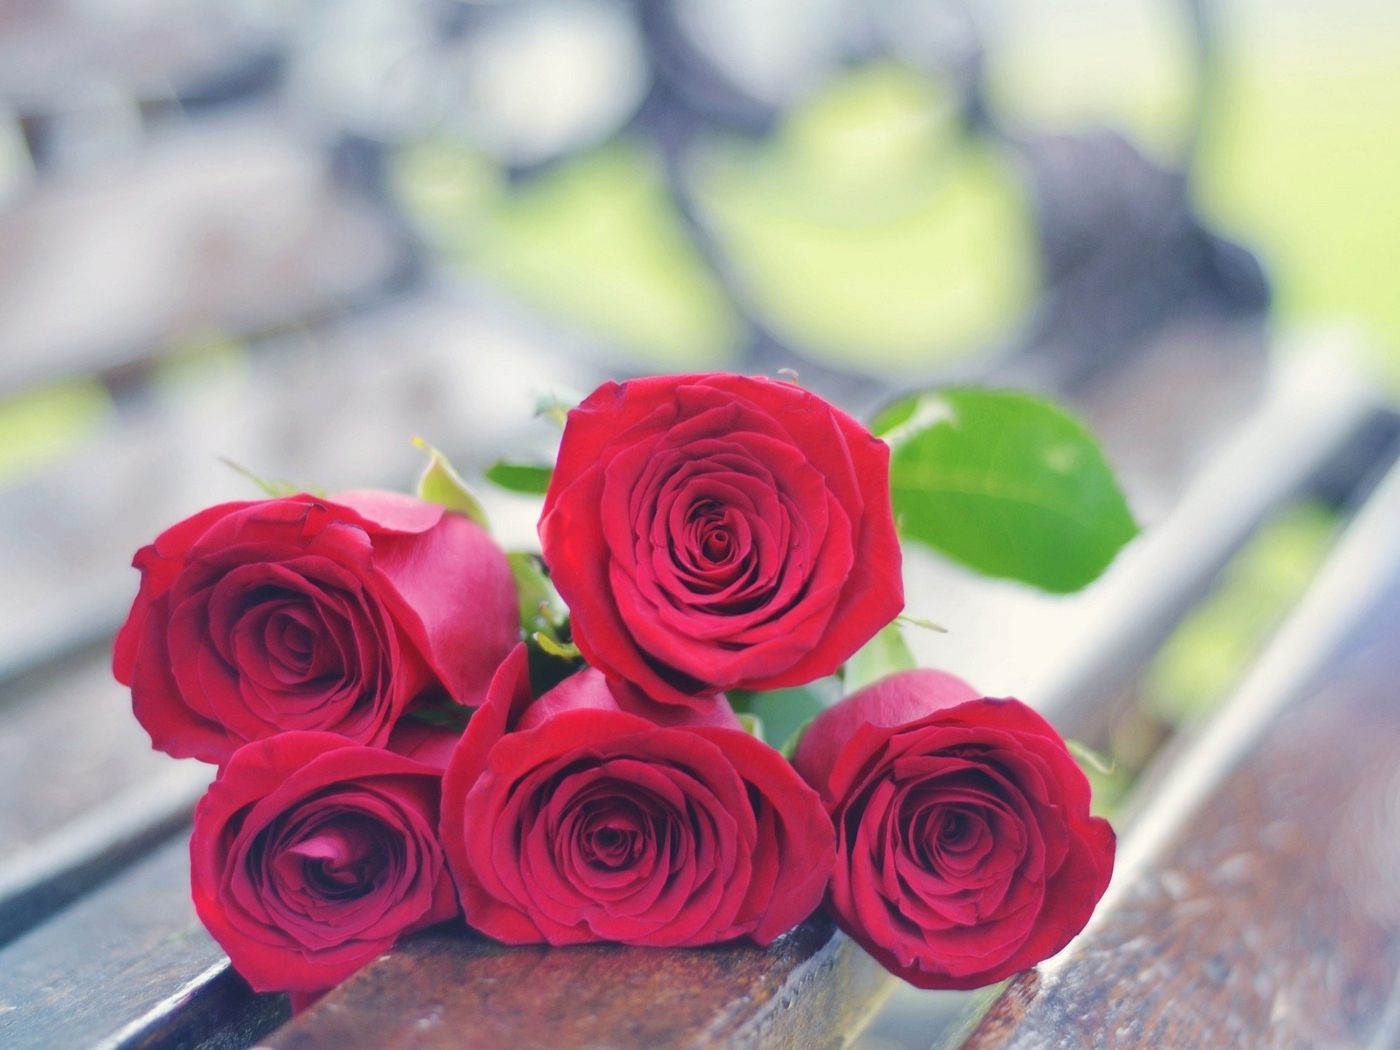 Red Roses Bouquet On Bench wallpaper 1400x1050